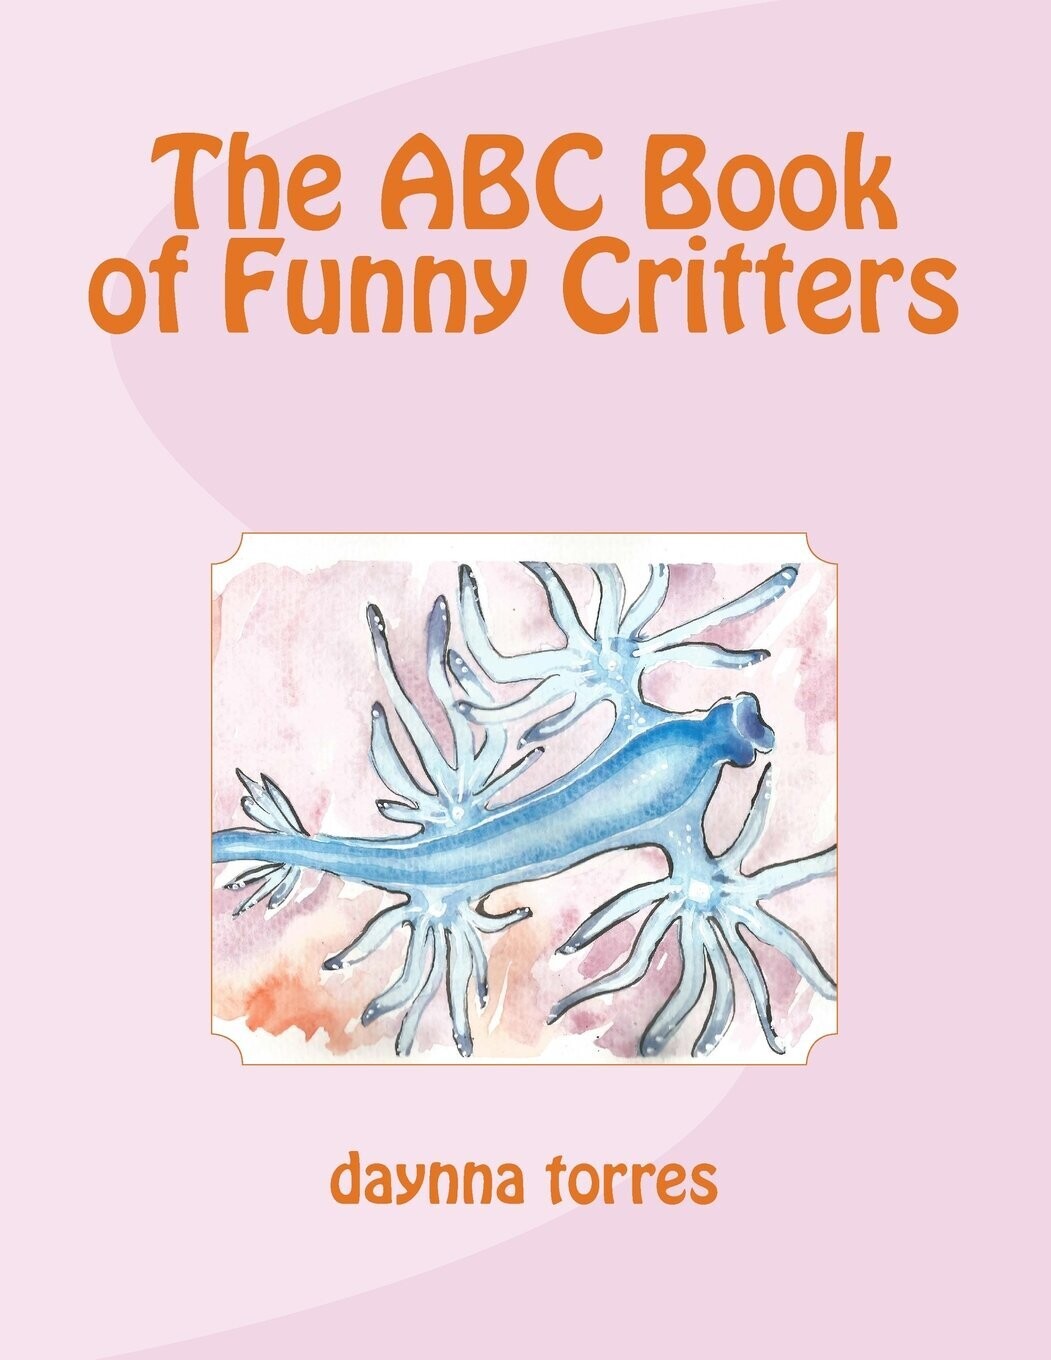 The ABC Book of Funny Critters